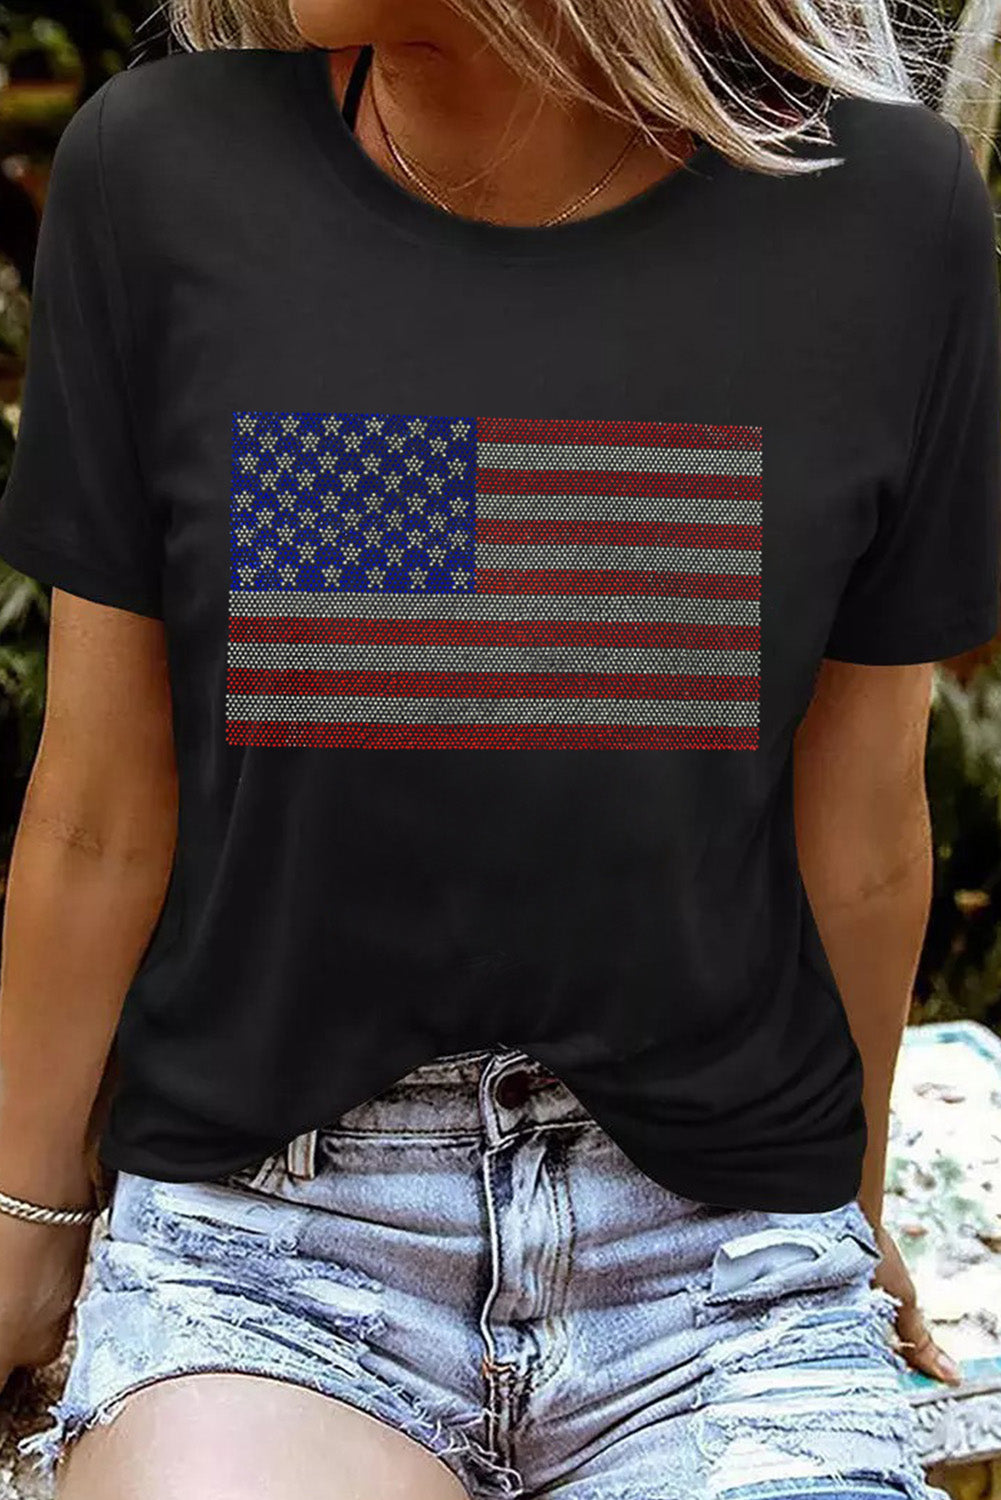 Sparkle in this Black Rhinestone American Flag Tee! Perfect blend of patriotism and style for any casual or celebratory occasion.